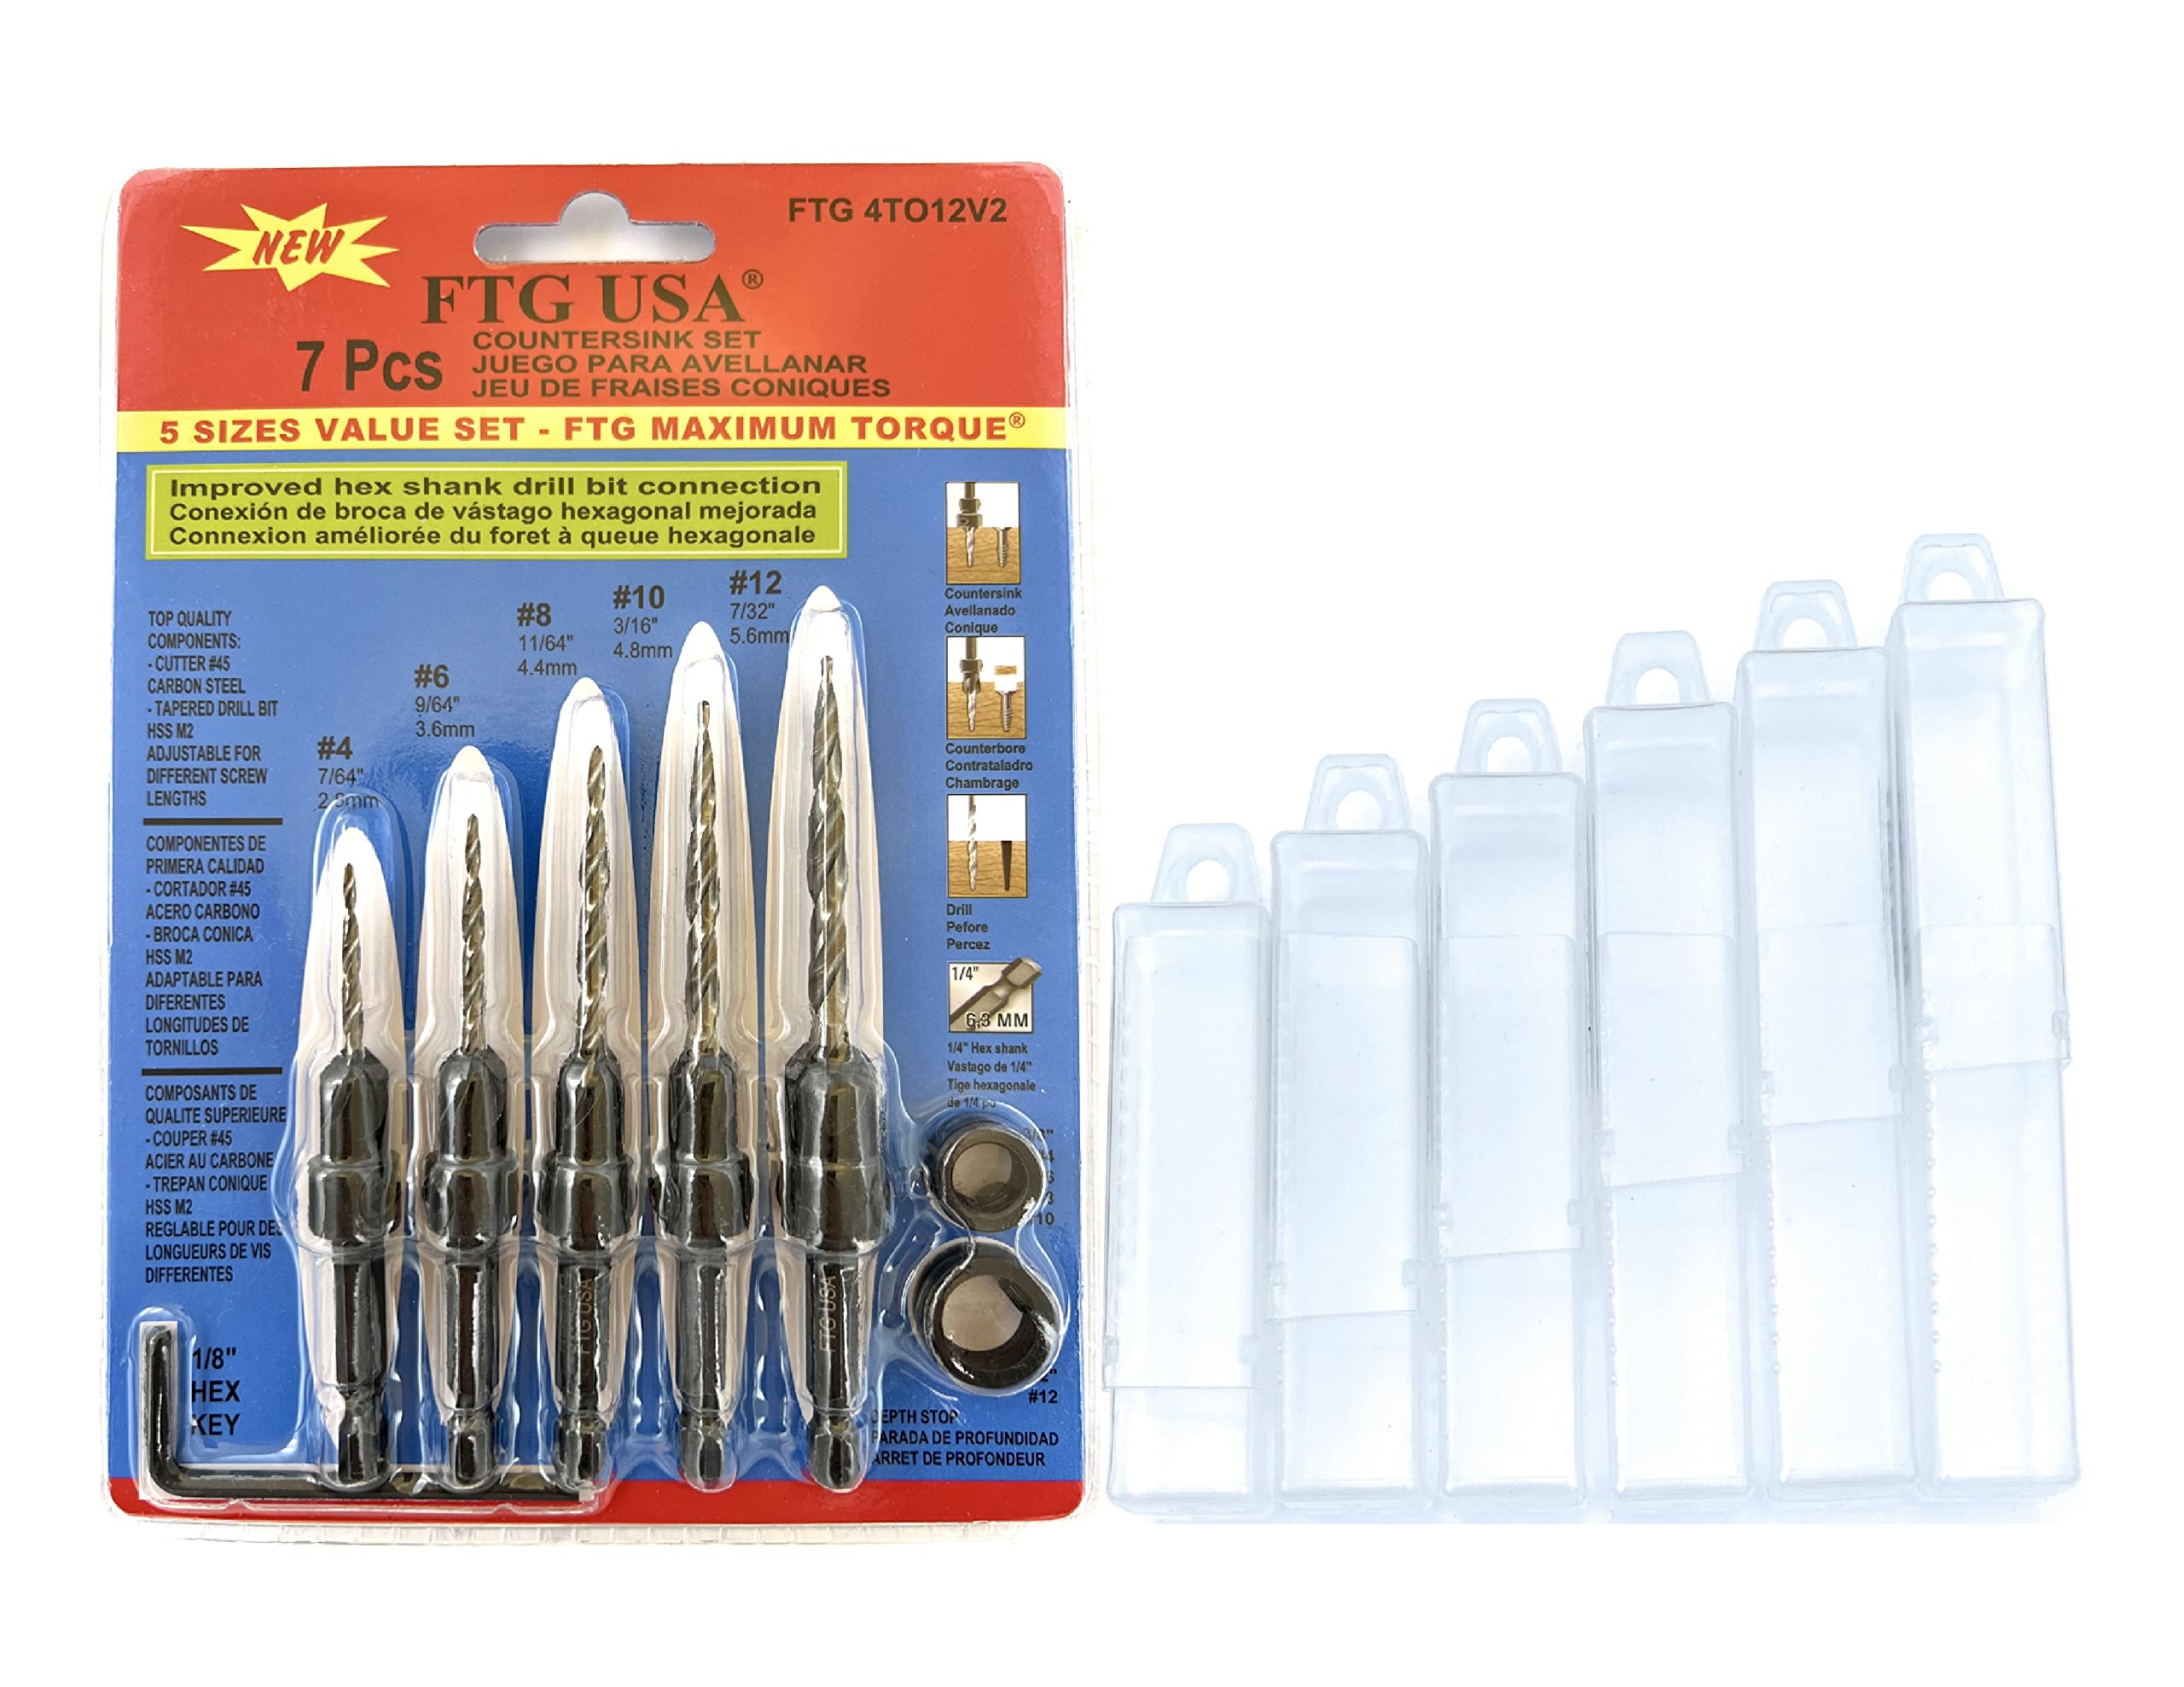 FTG USA Wood Countersink Drill Bit Set 5 Sizes Set Countersink #4, 6, 8, 10, 12 Tapered Drill Bits with Hex Shank Countersink bit, 2 Stop Collar, 1 Allen Wrench, 6 Storage Containers